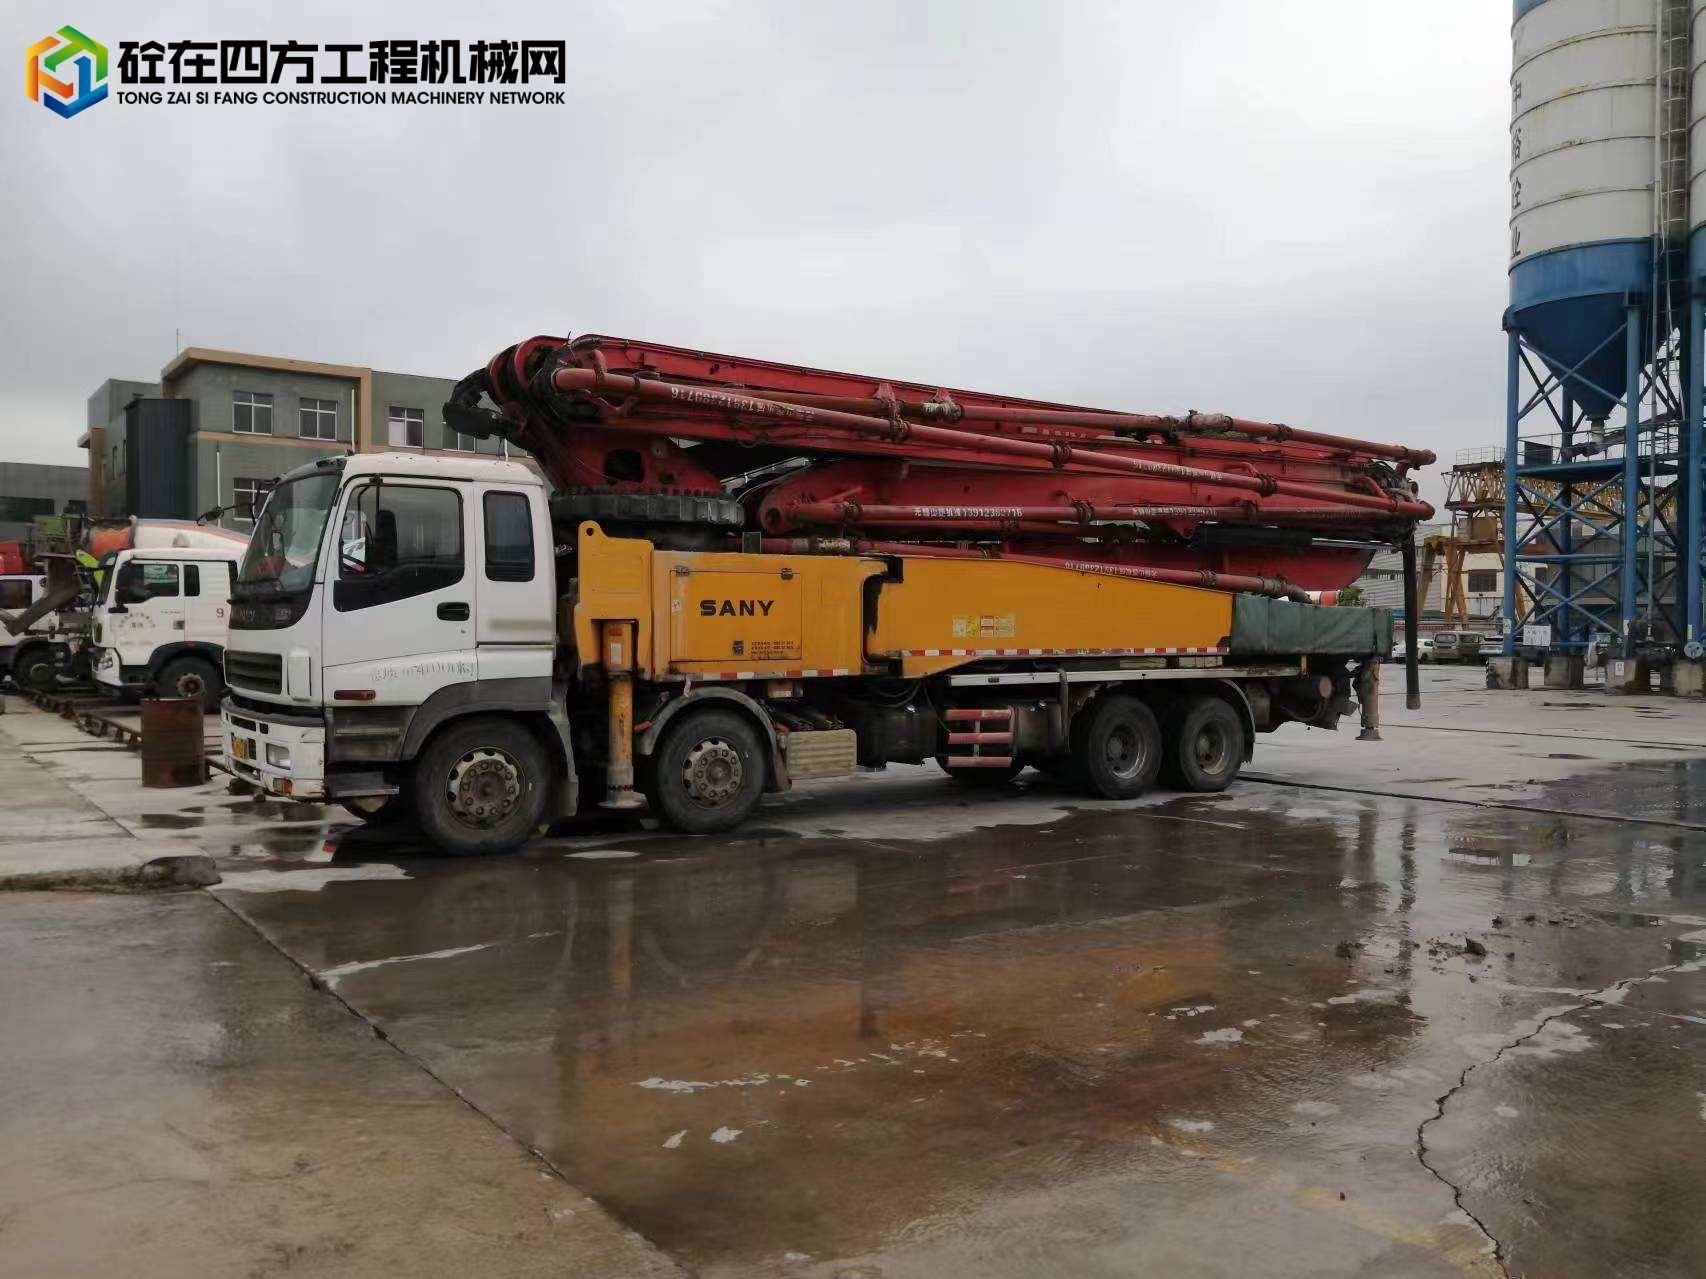 https://images.tongzsf.com/tong/truck_machine/20240406/16610bfb3a032c.jpg